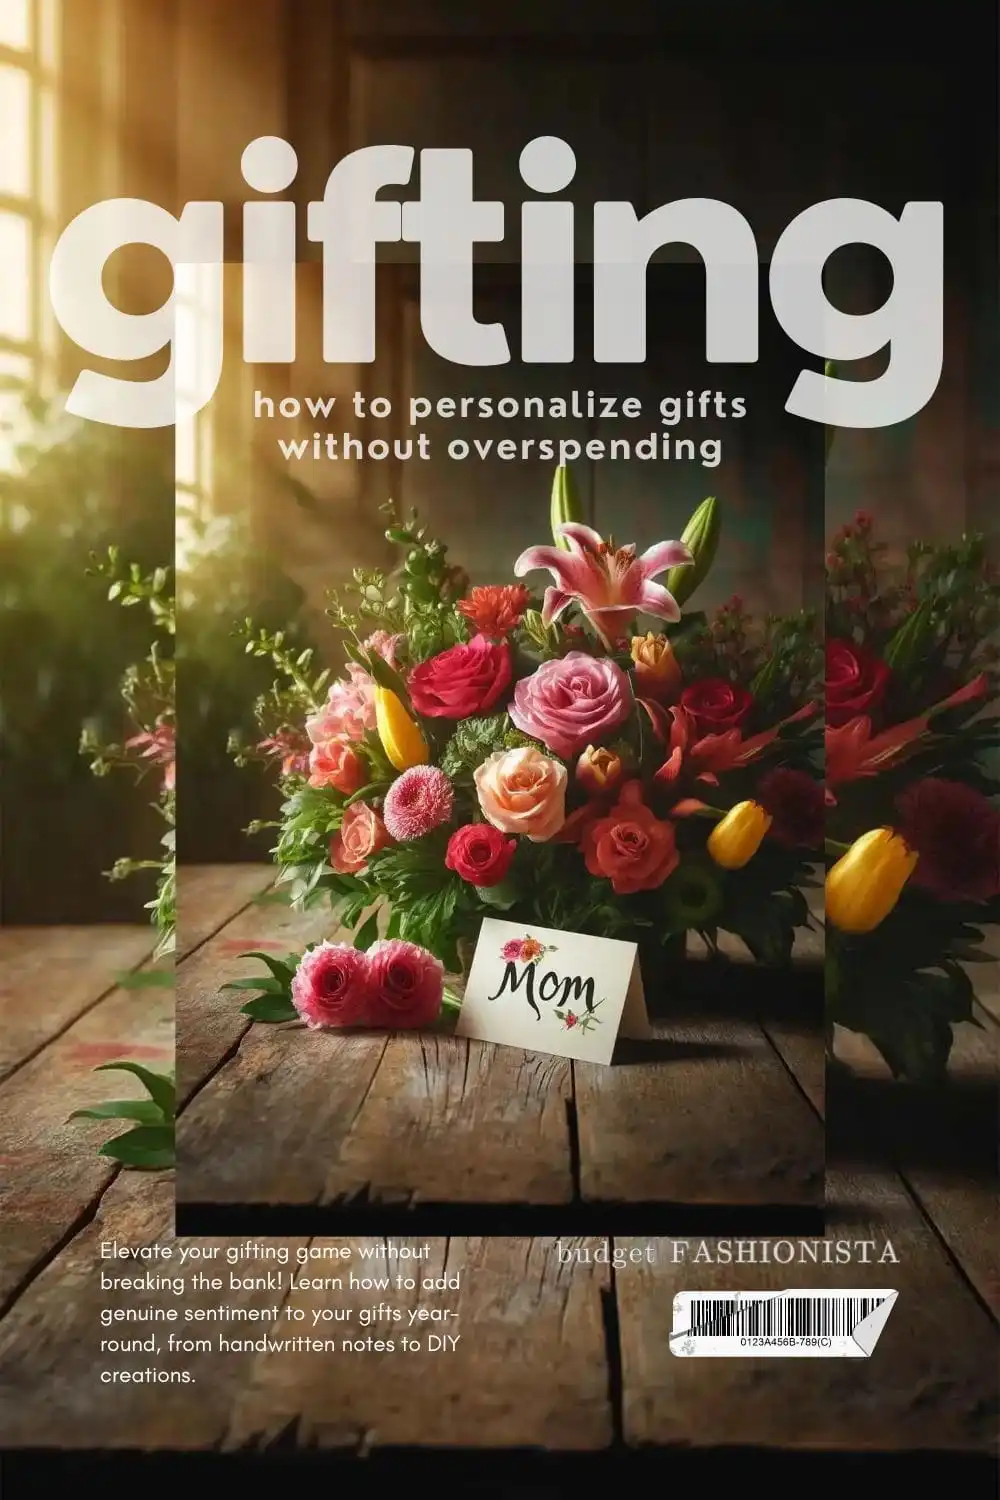 Magazine style cover image showing bouquet and text overlay.